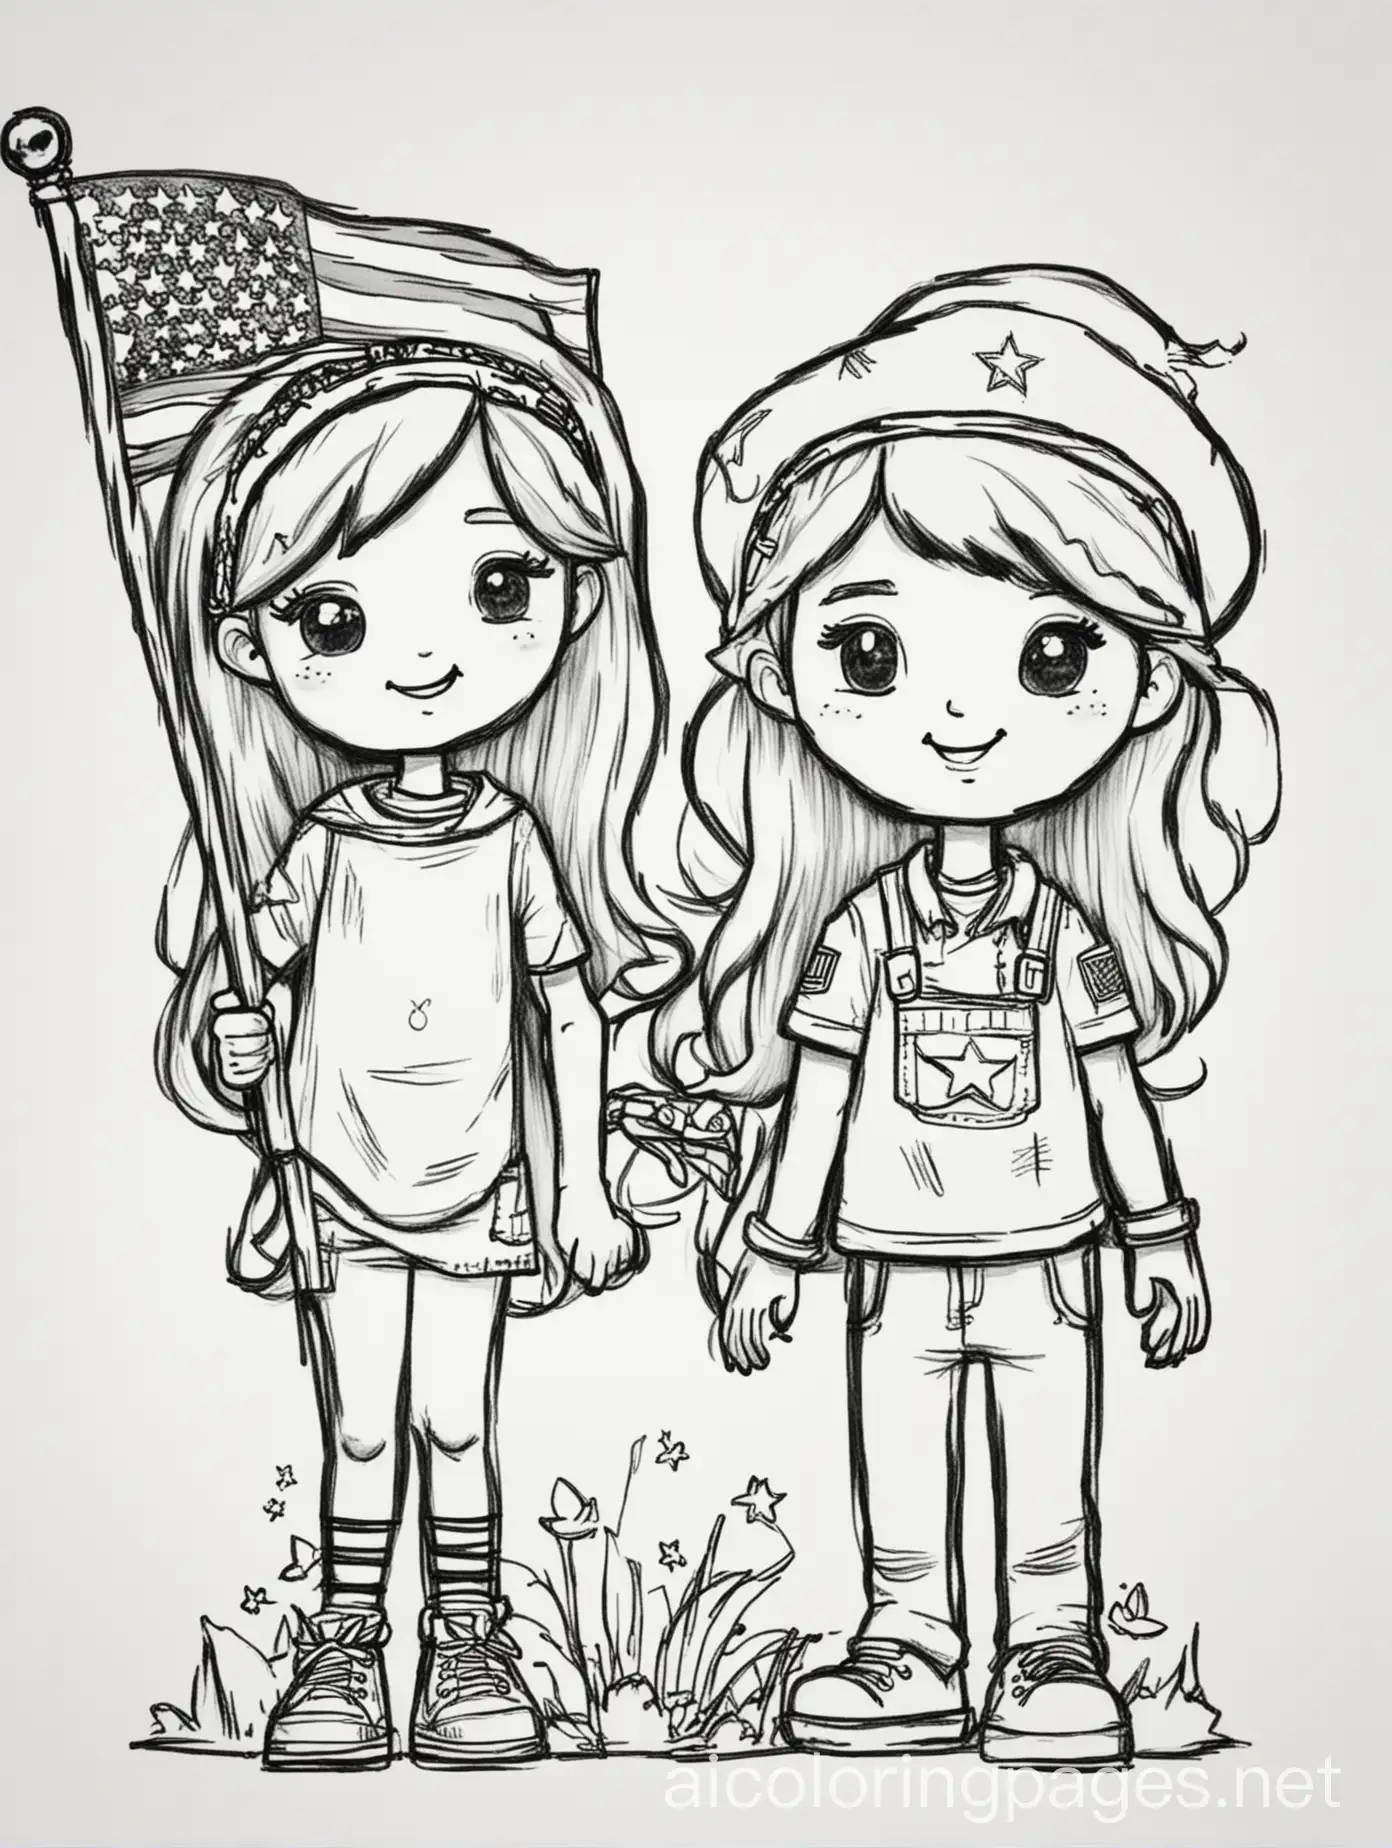 Children-Coloring-on-Memorial-Day-Simple-Line-Art-for-Fun-and-Friendship